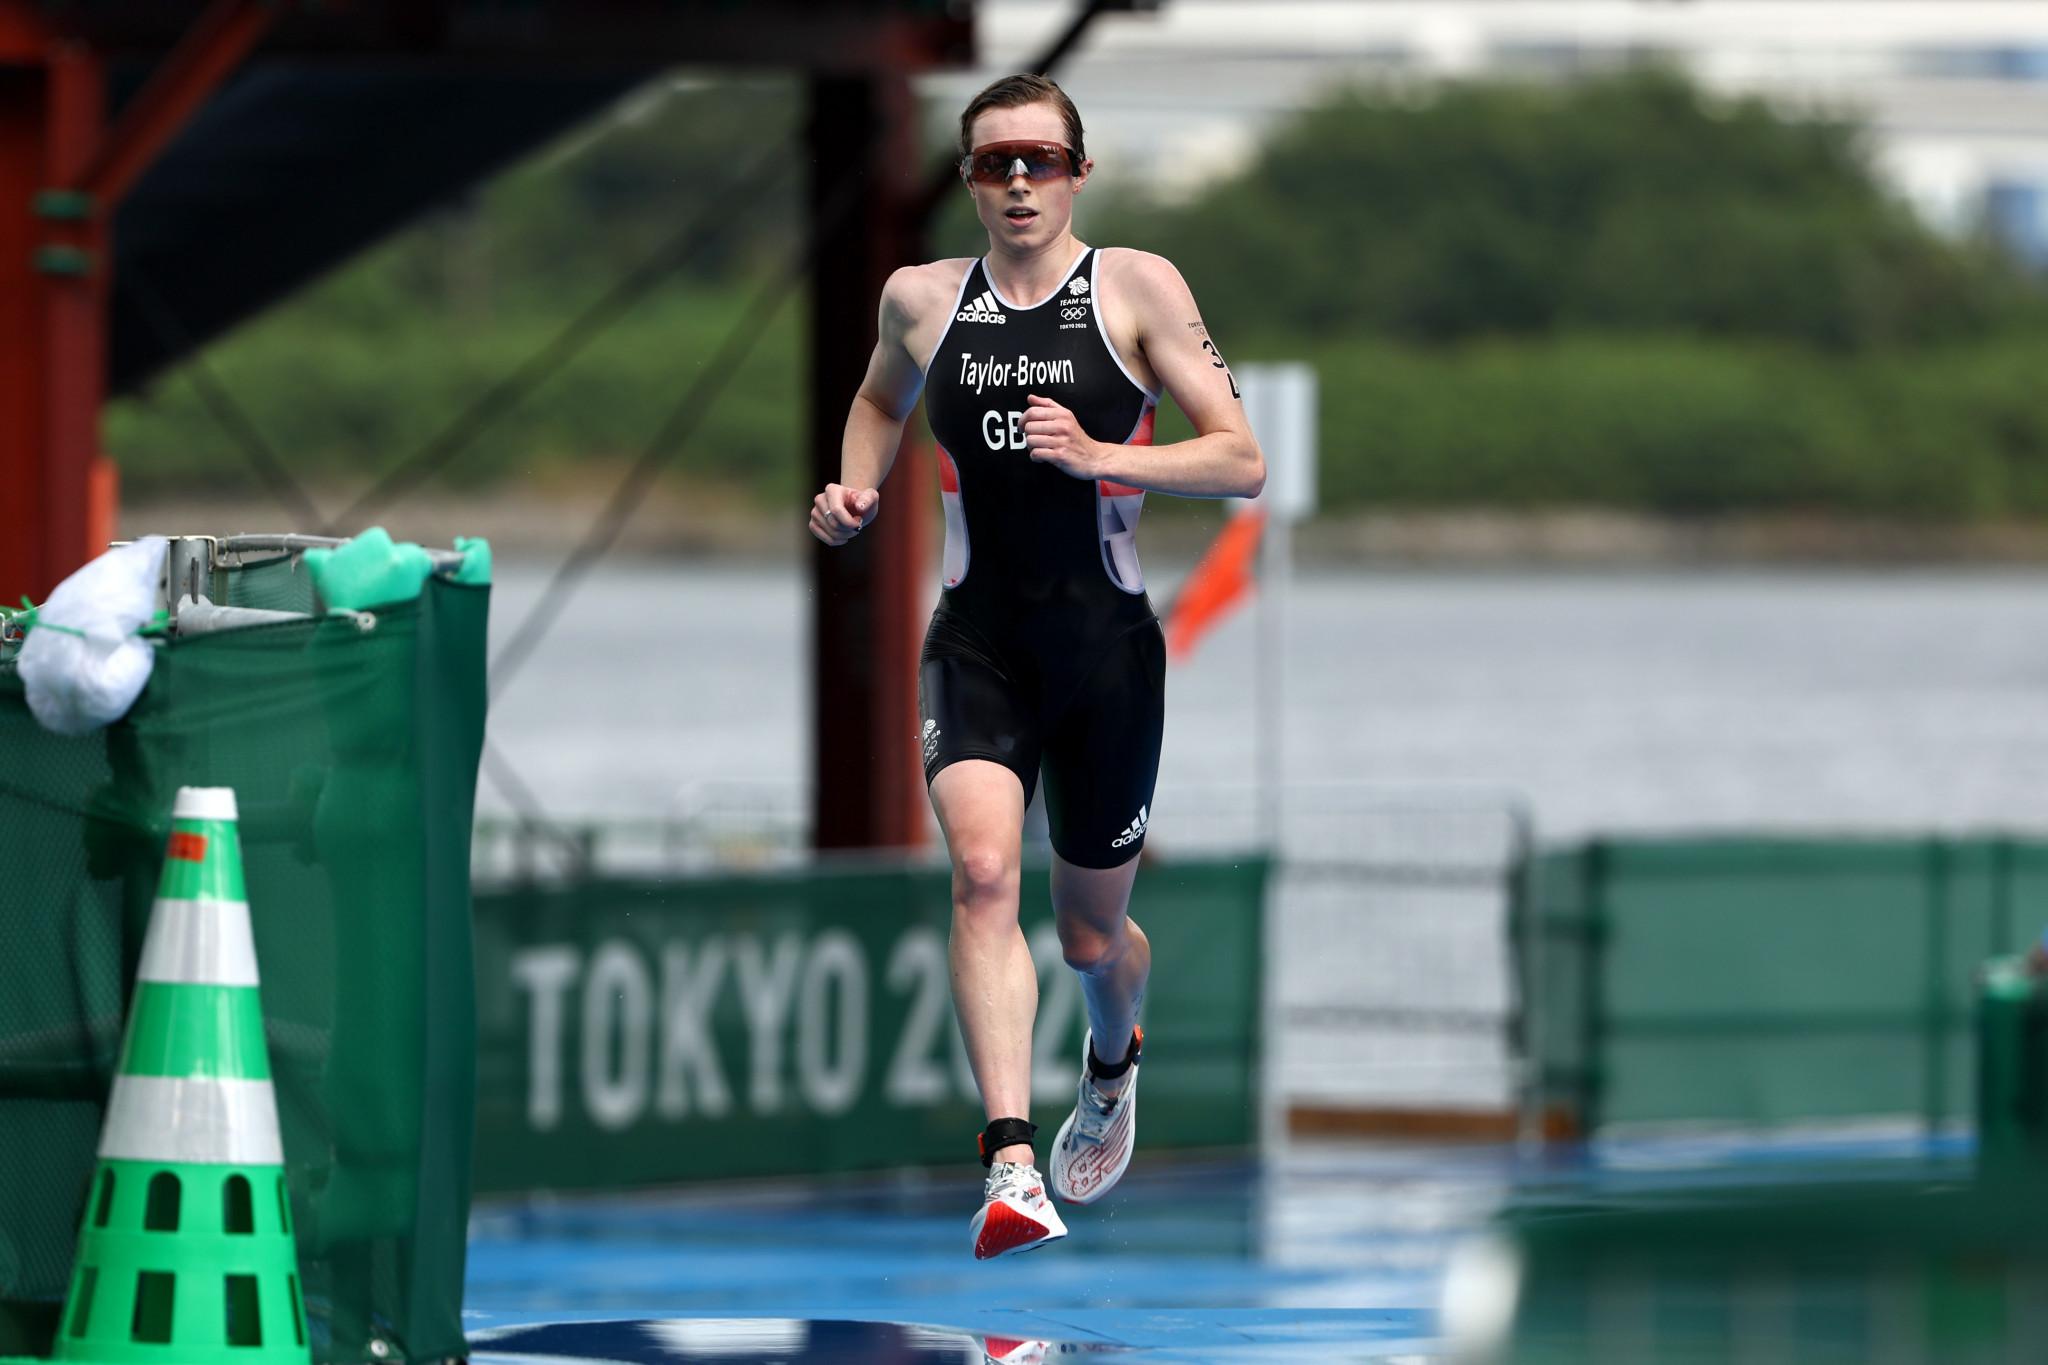 Georgia Taylor-Brown triumphed in the women's elite race at the World Triathlon Championship Series in Cagliari ©Getty Images